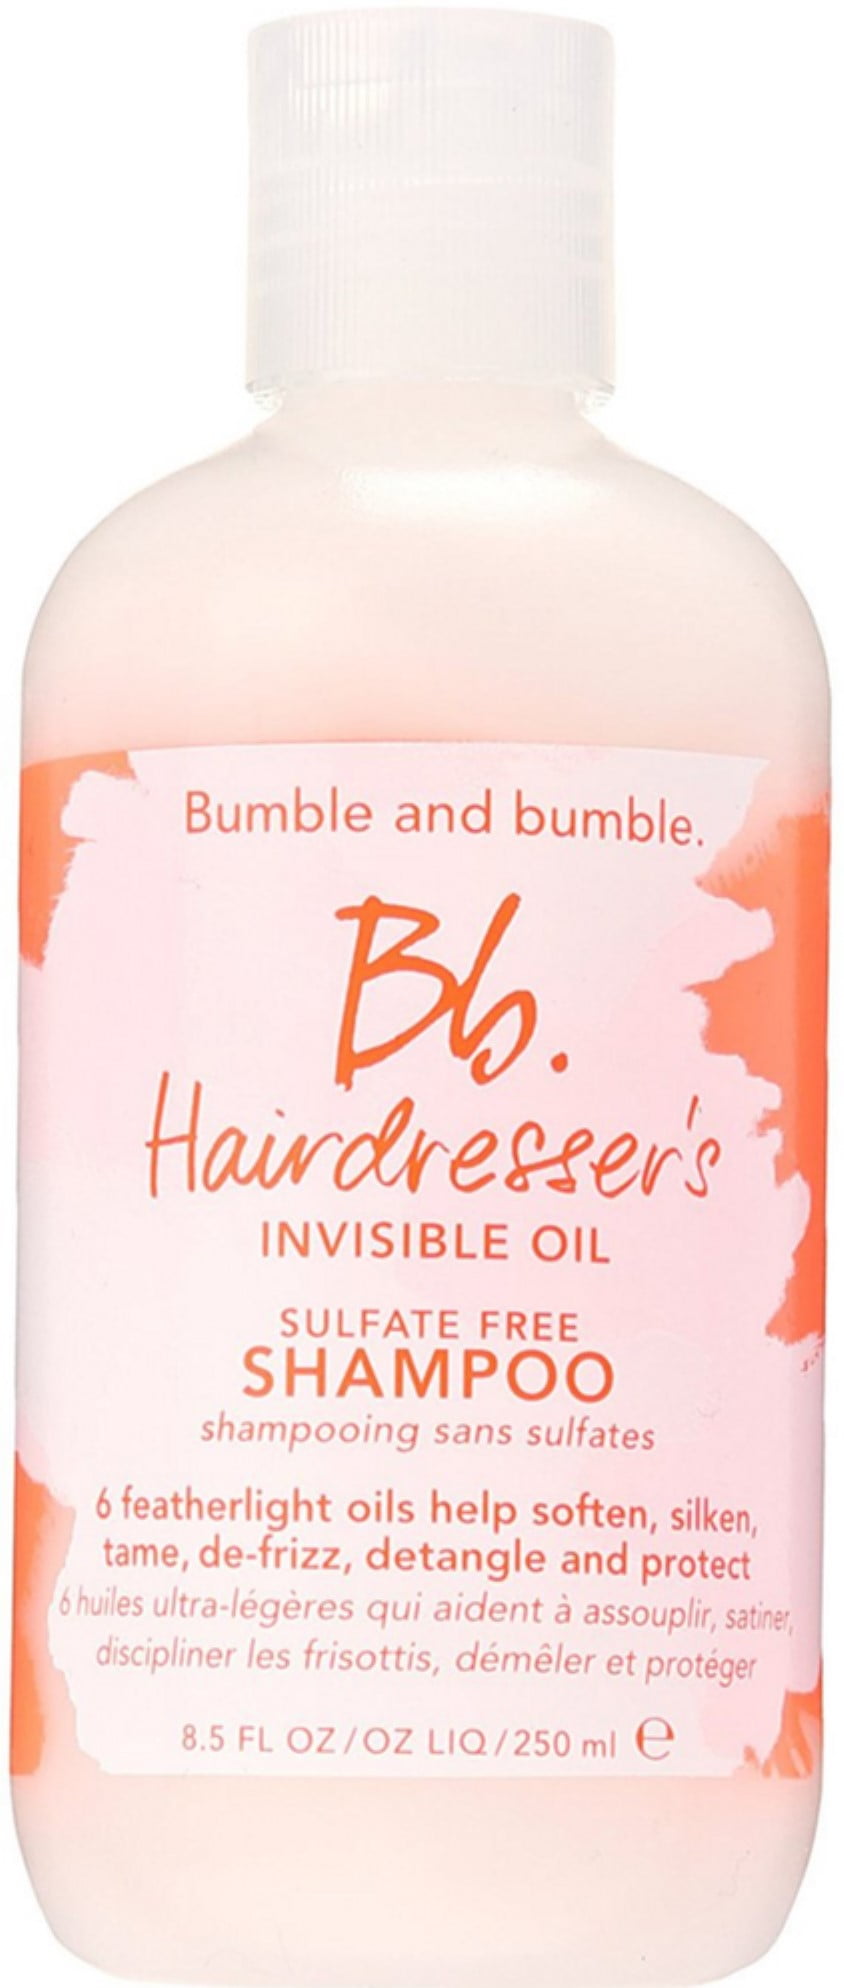 ($31 Value) Bumble & Bumble Hairdresser's Invisible Oil Sulfate Free Shampoo, 8.5 Oz